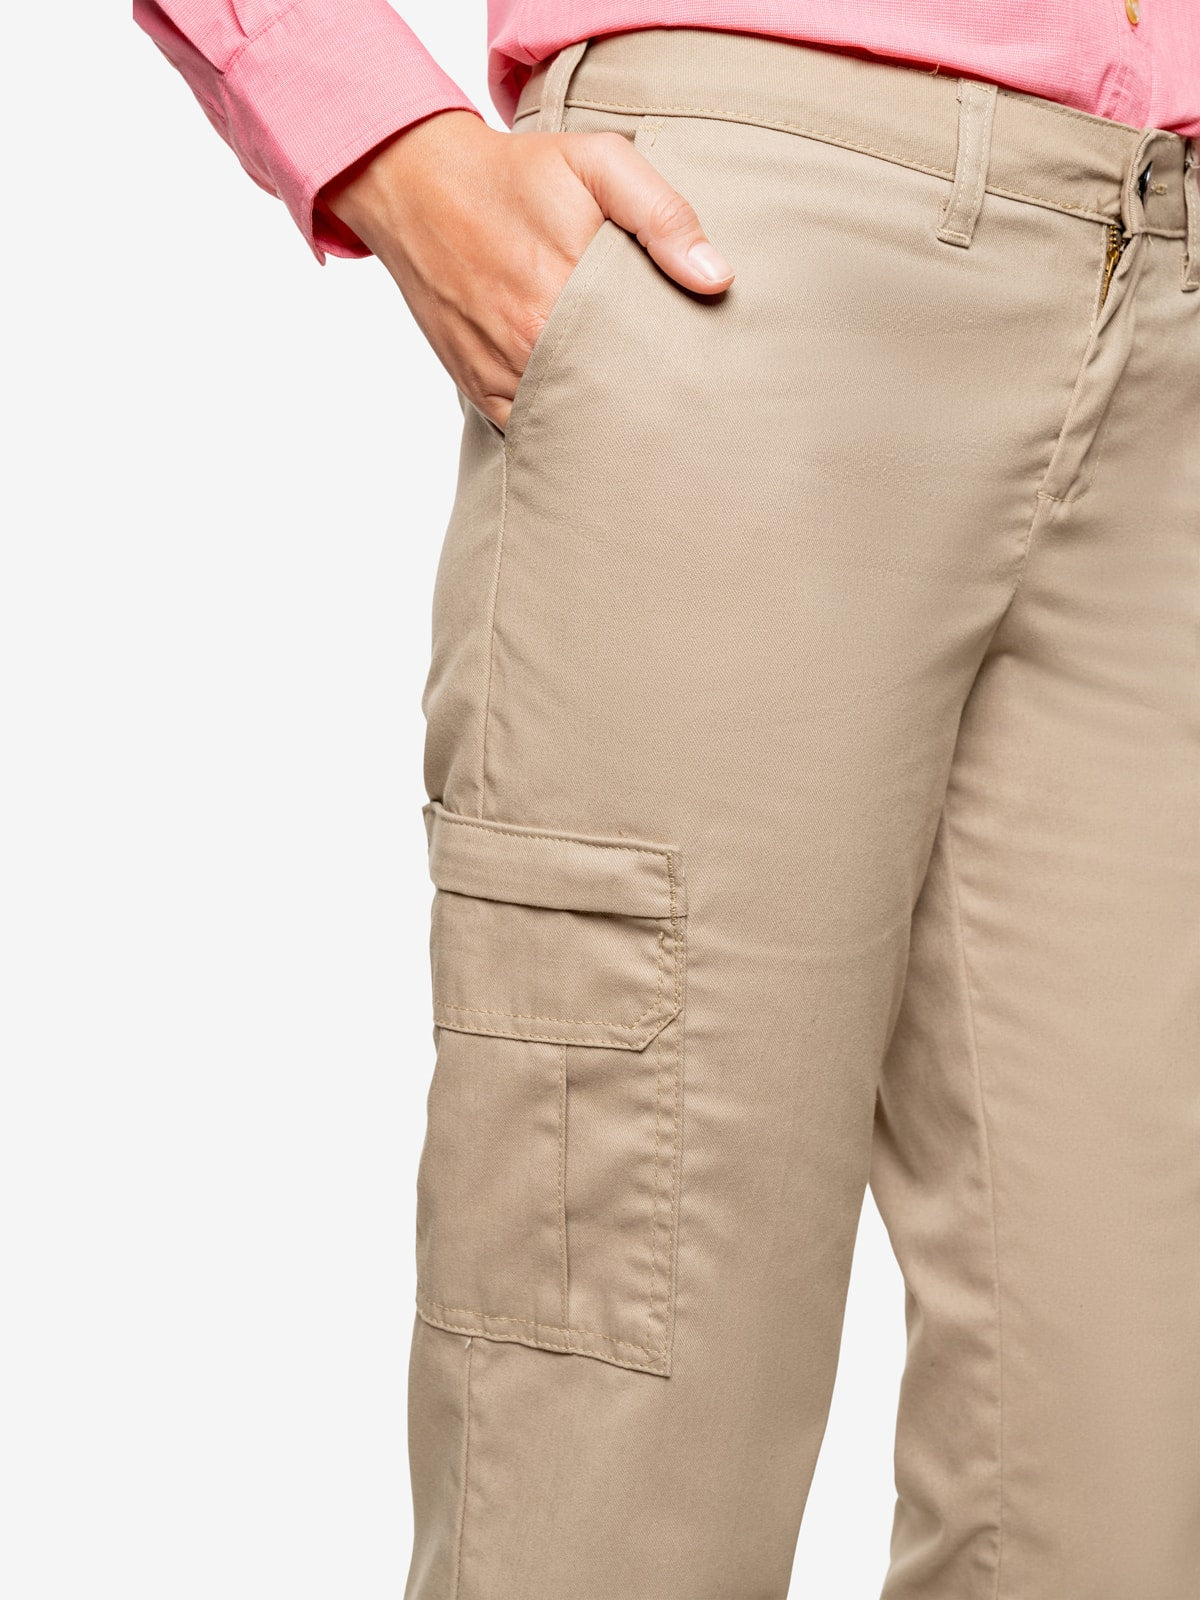 Insect Shield Women's Cargo Pants